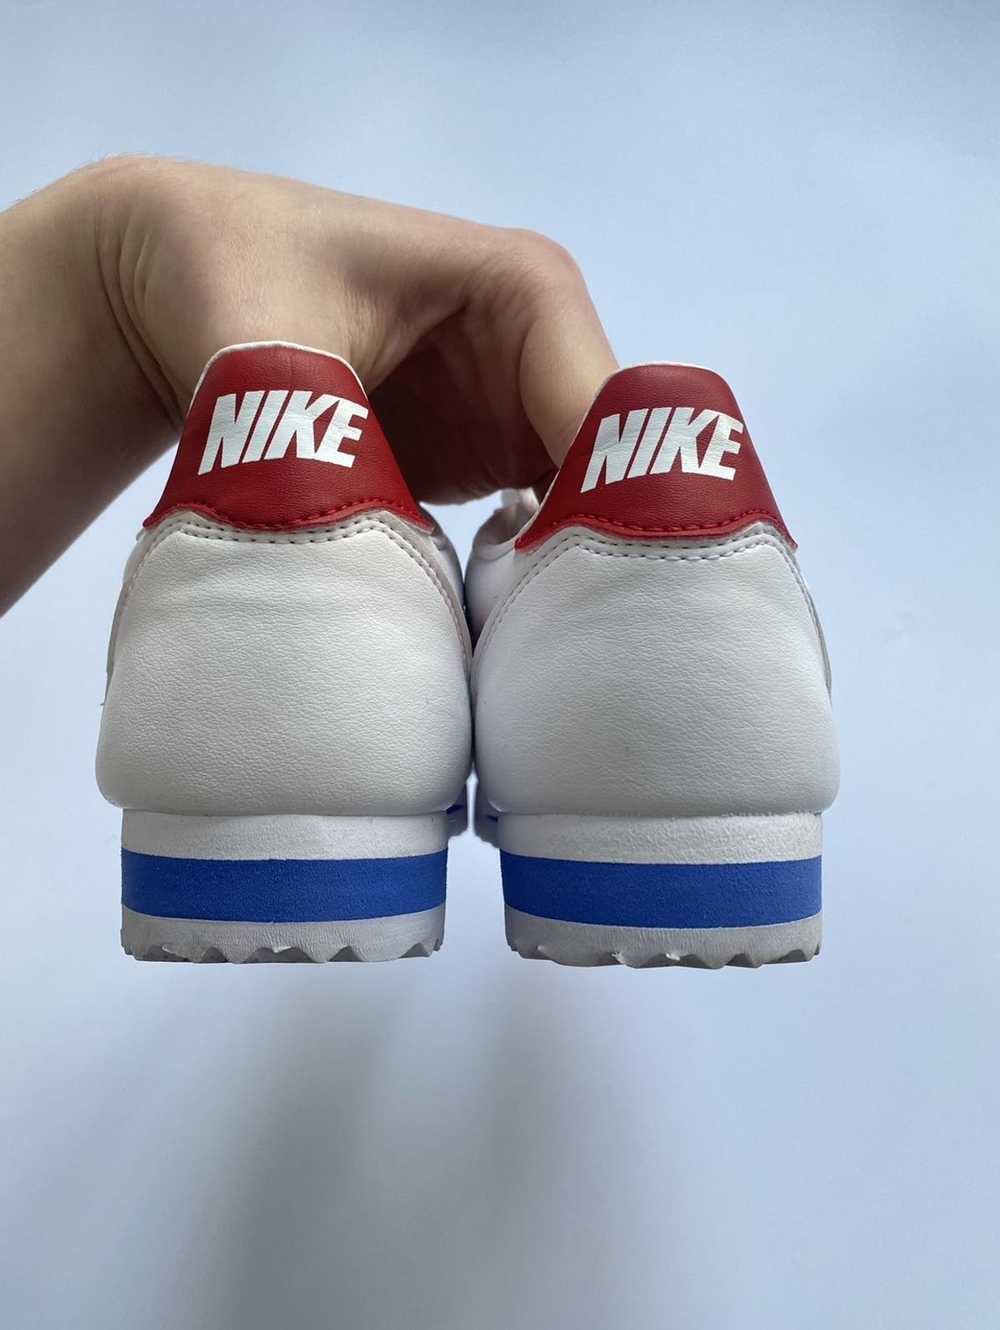 Nike Nike Cortez “Forrest Gump” sneakers - image 3